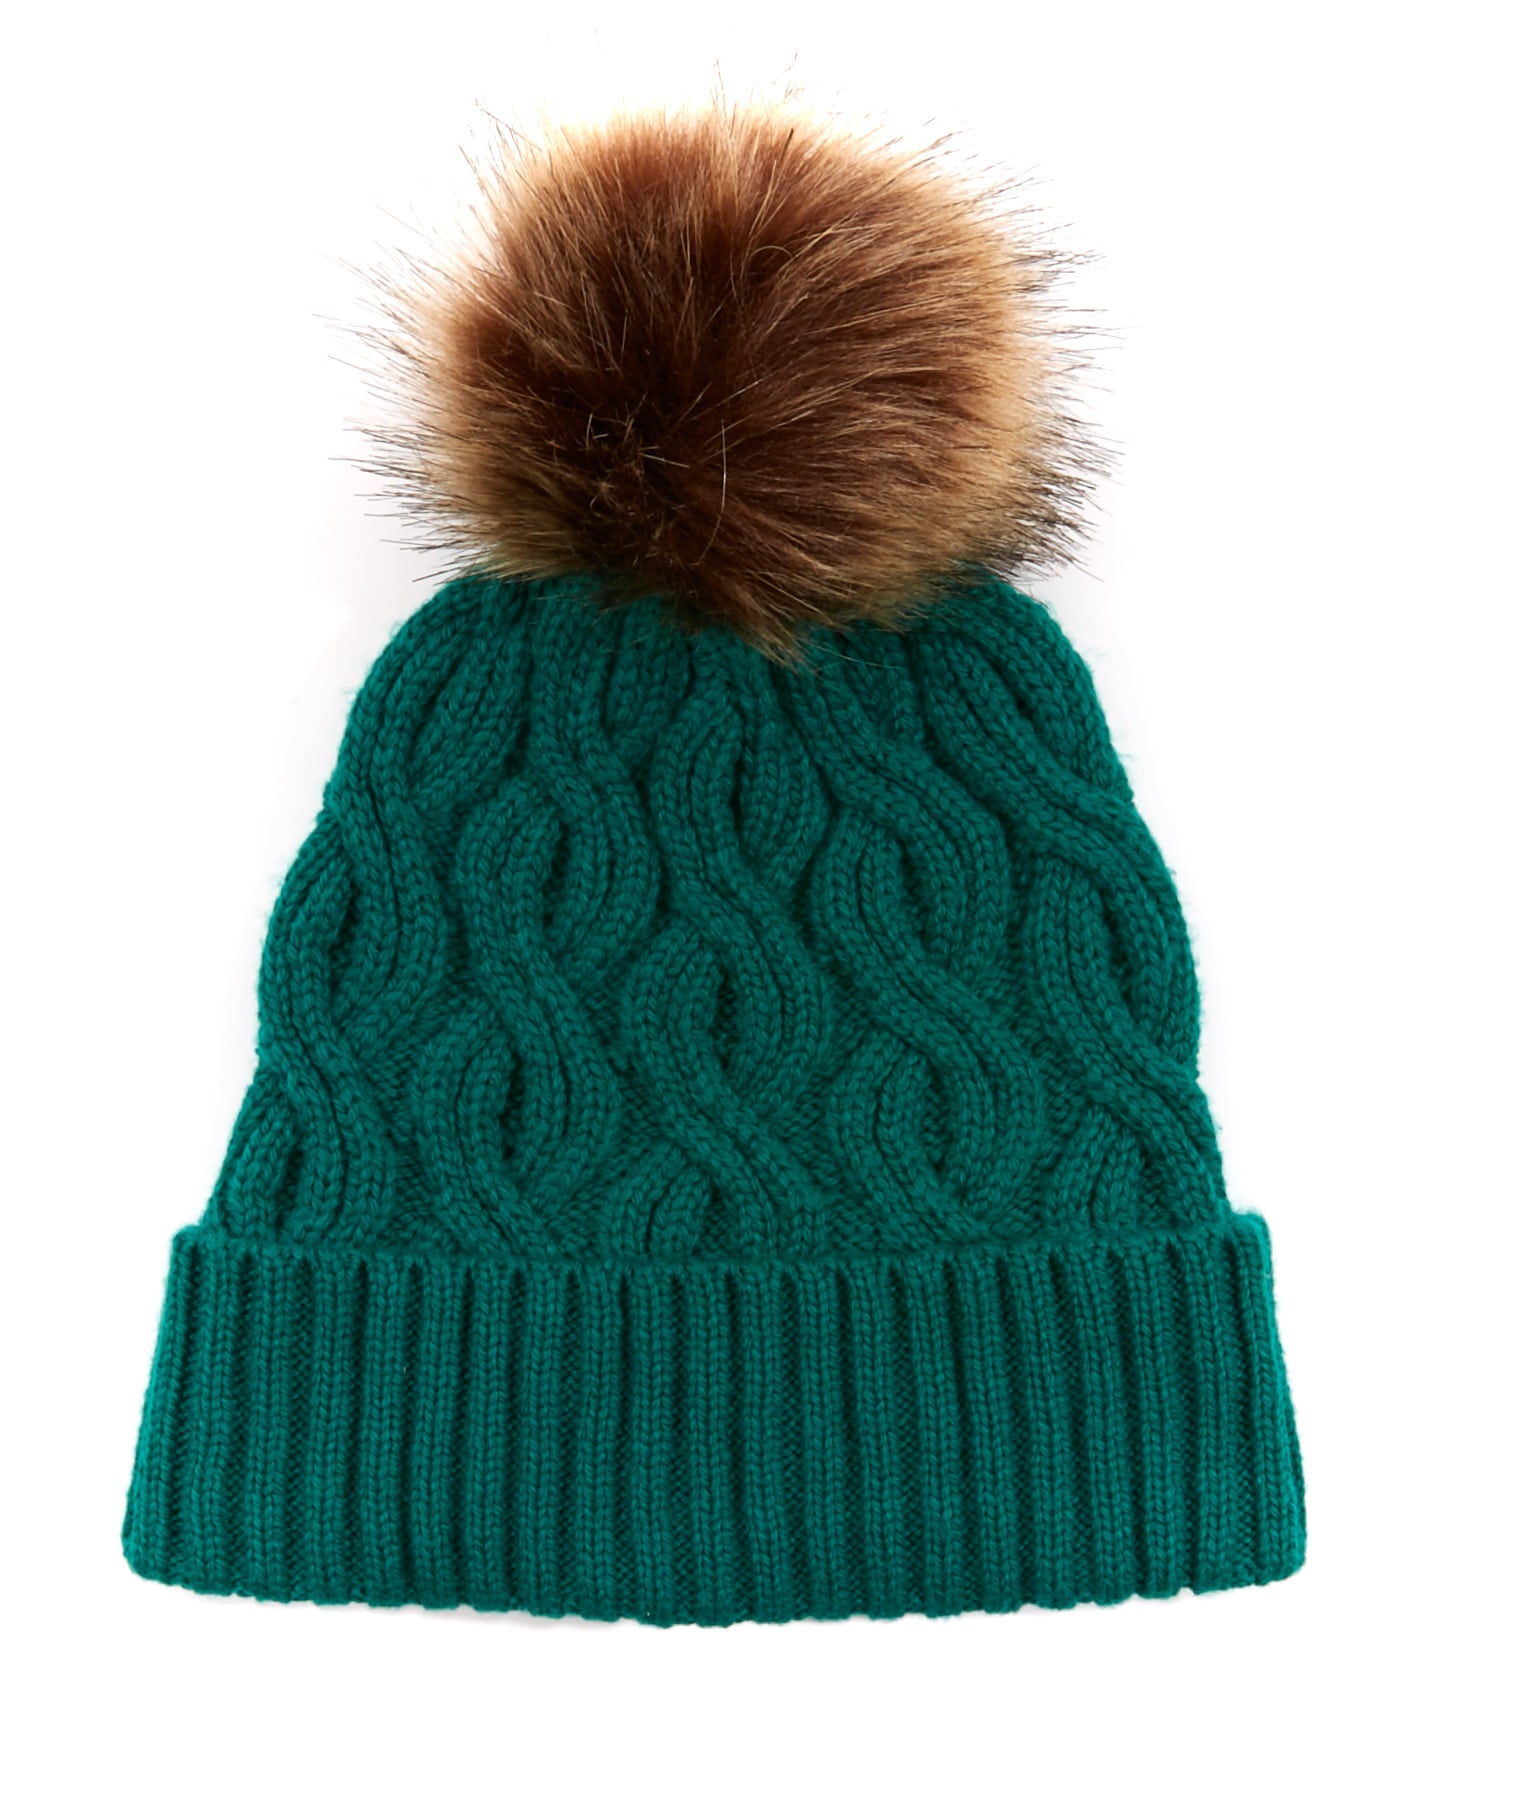 Recycled Pom Hat in color Emerald